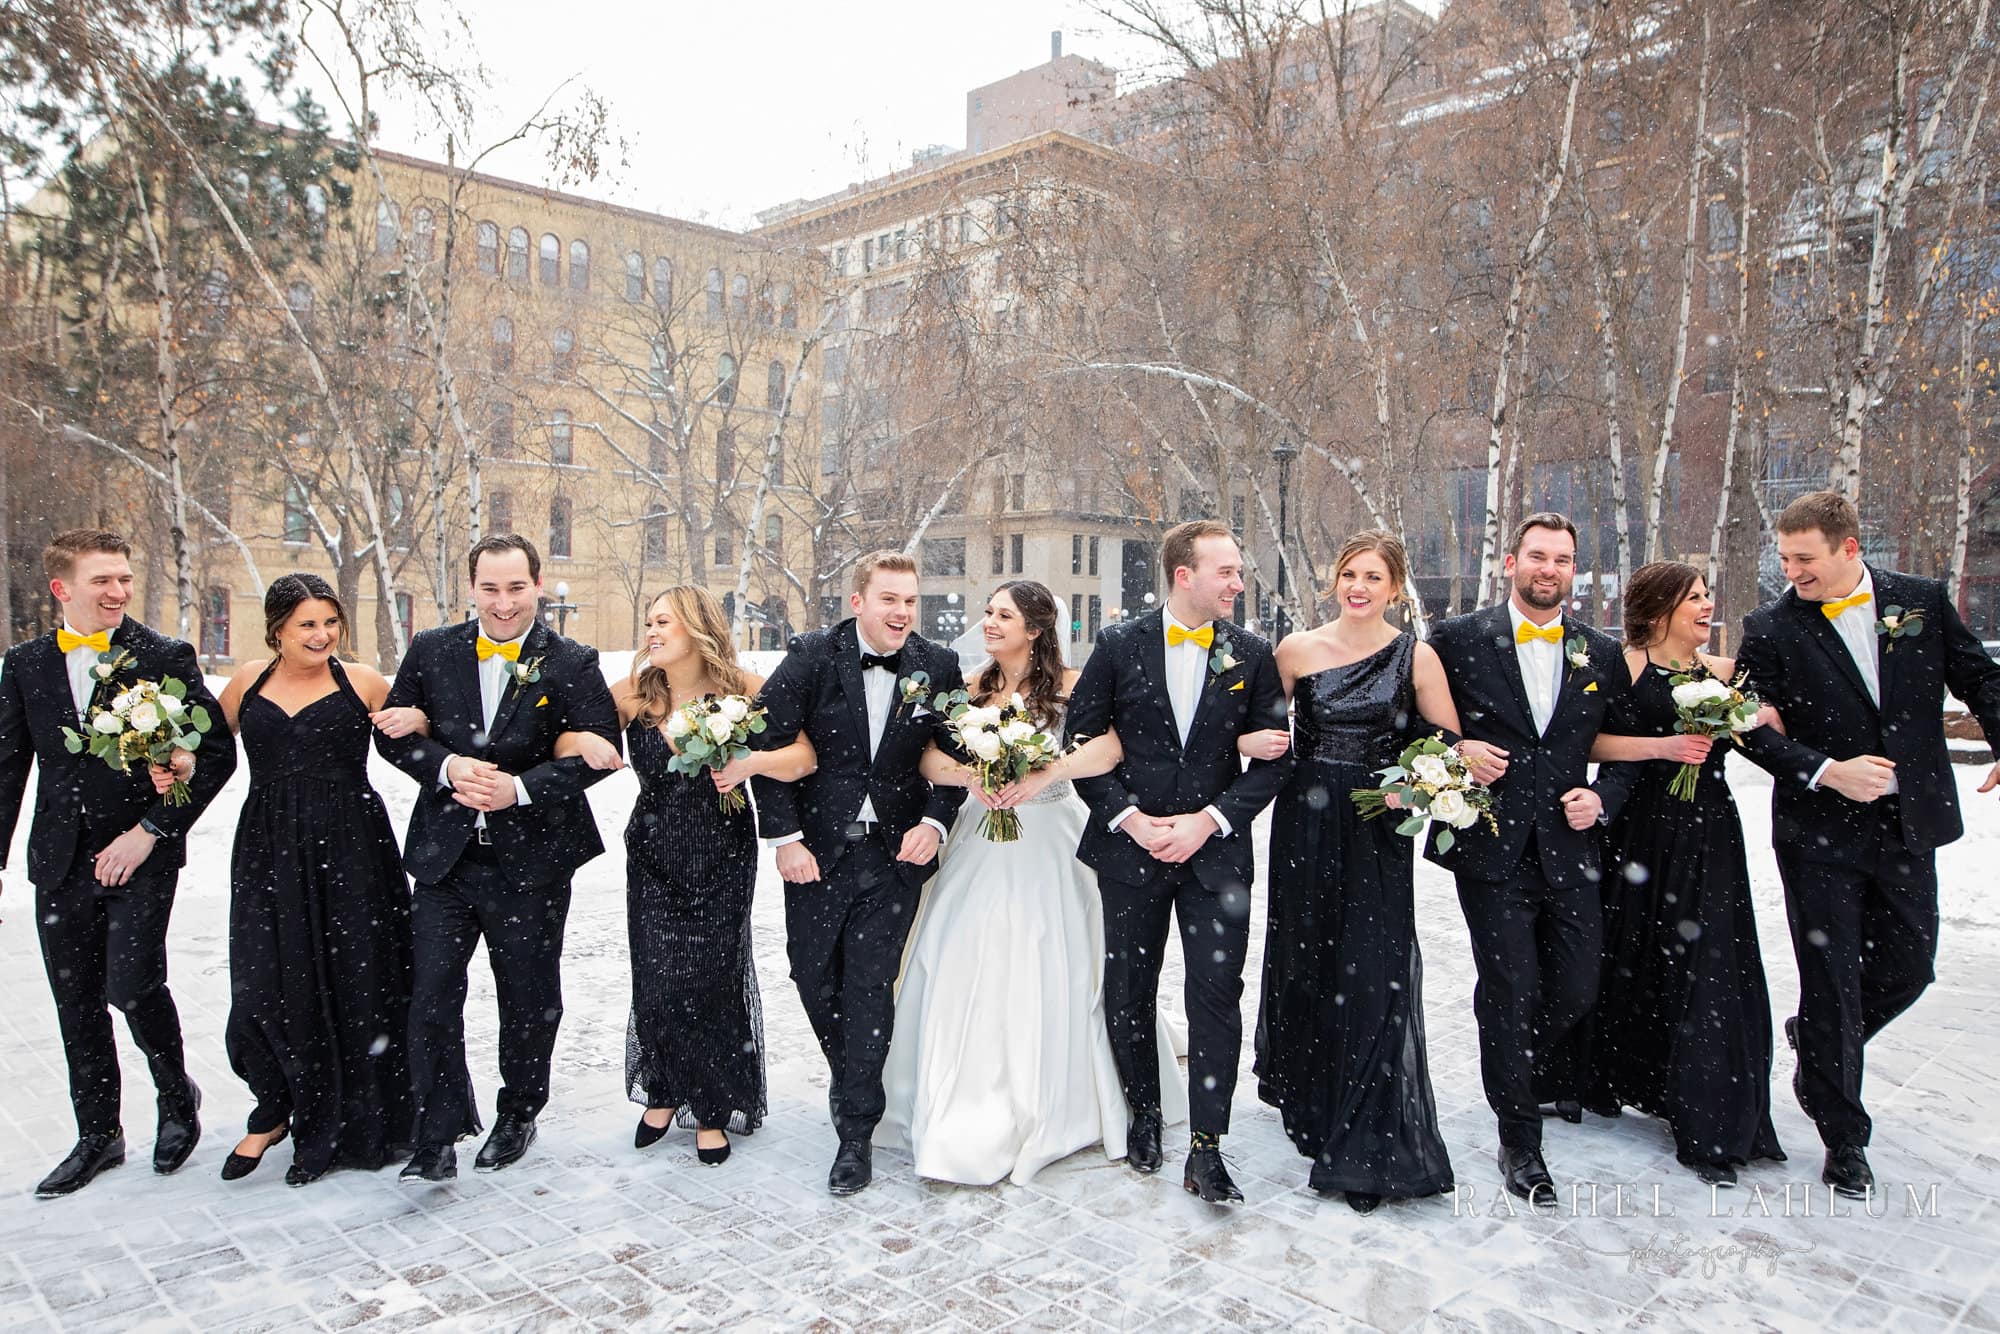 Bridal party lock arms and walk forward in snowy winter wedding at Mears Park in St. Paul, MN.